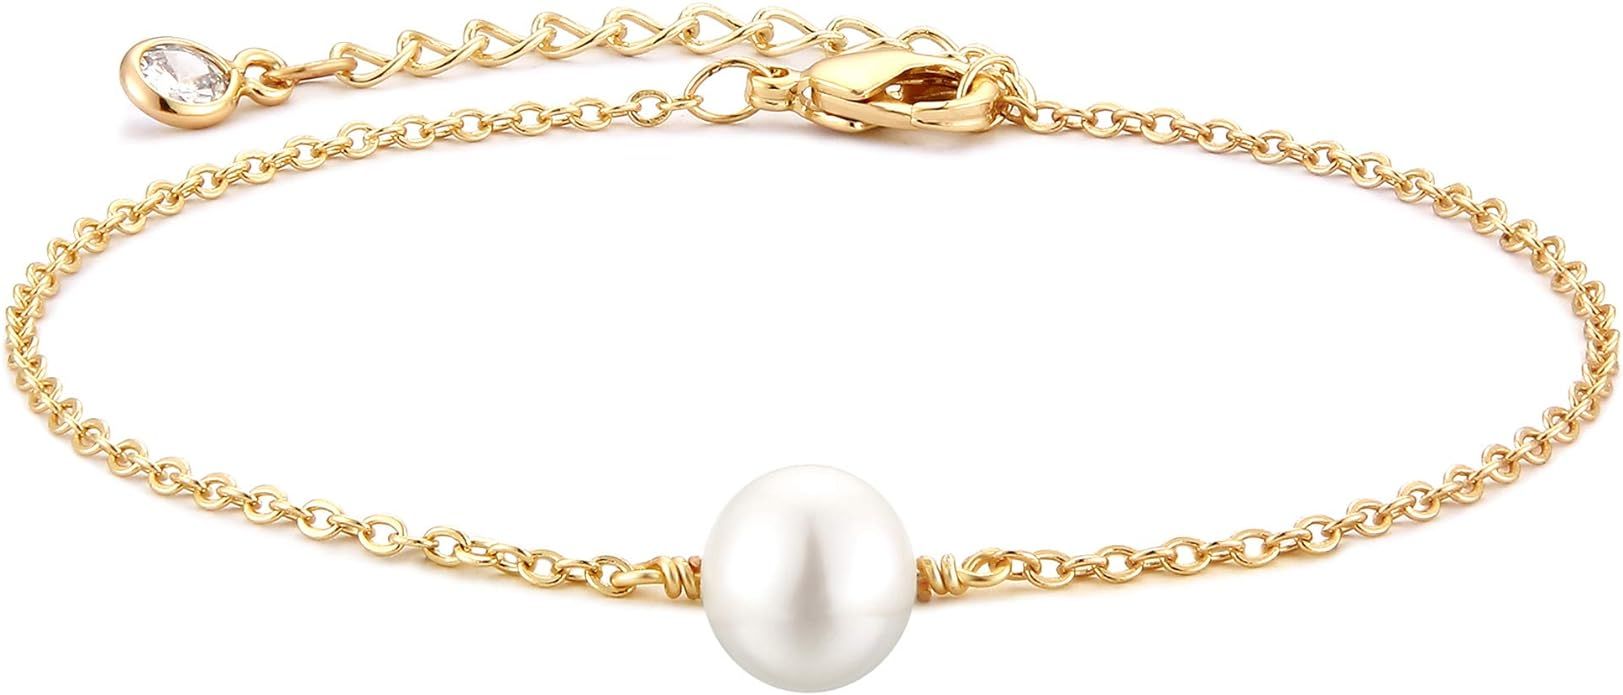 MEVECCO Bracelet for Women 14K Gold Plated Dainty Chain Simple Jewelry Cute for Girls | Amazon (US)